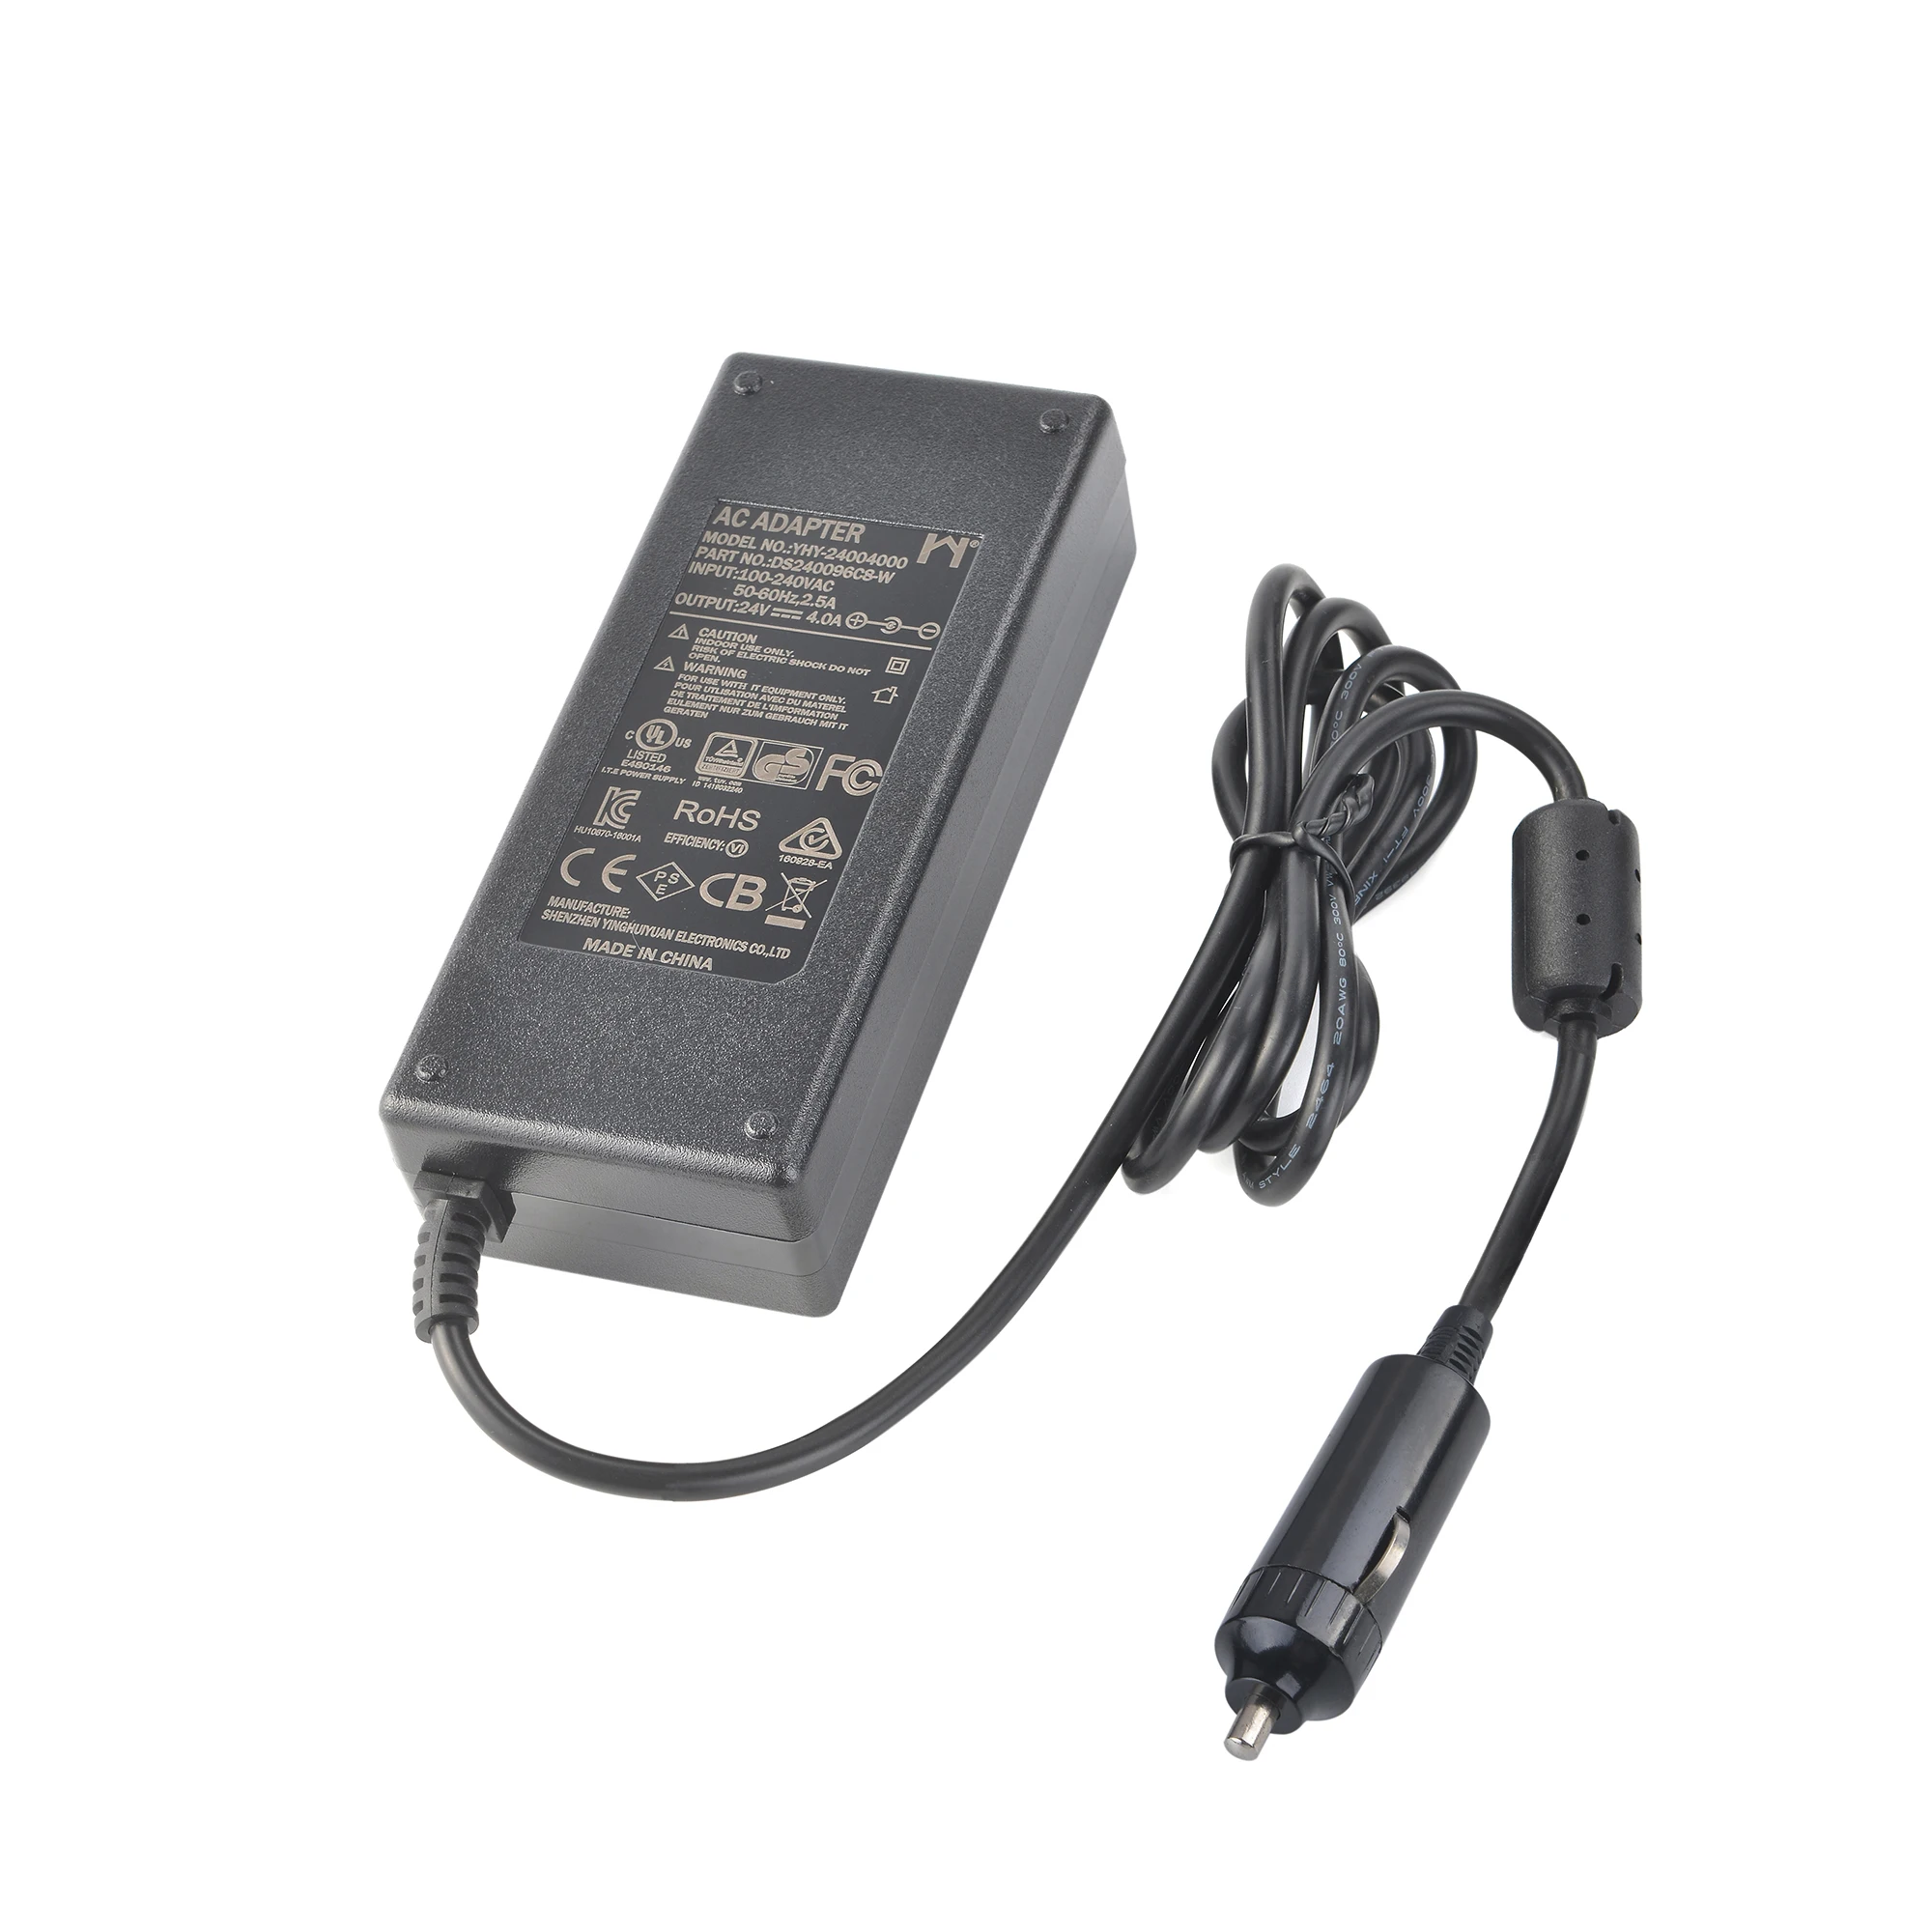 Tenswall AC 100-240V Wall Charger Power Supply Switching Adapter UK plug